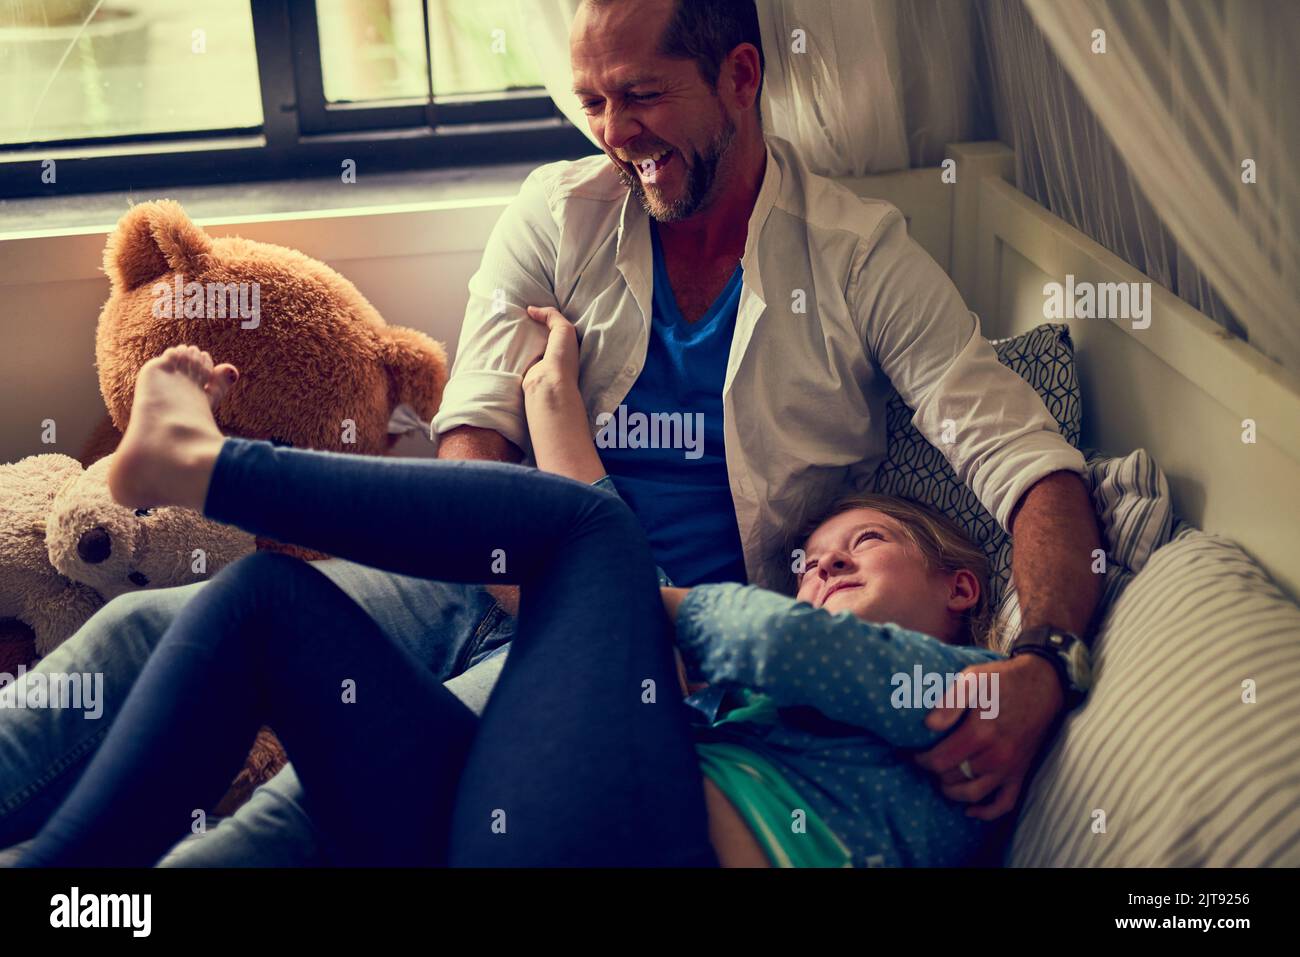 Tickle attack. a man spending some quality time with his daughter. Stock Photo